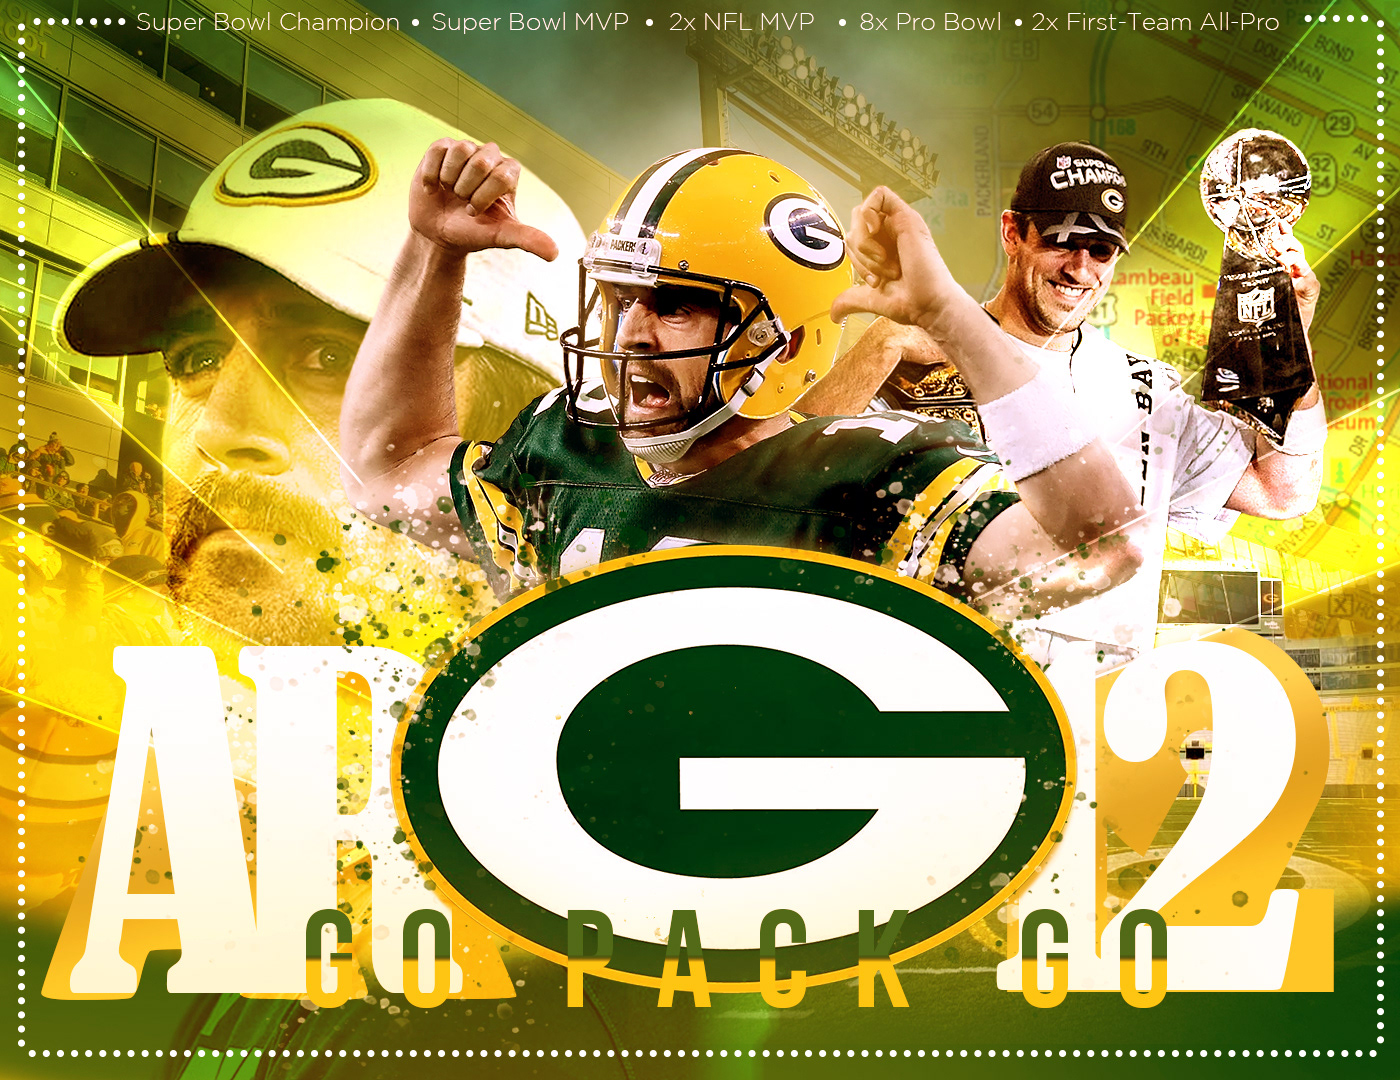 aaron Aaron Rodgers AR12 Arod football go pack Green Bay packers quarterback rodgers